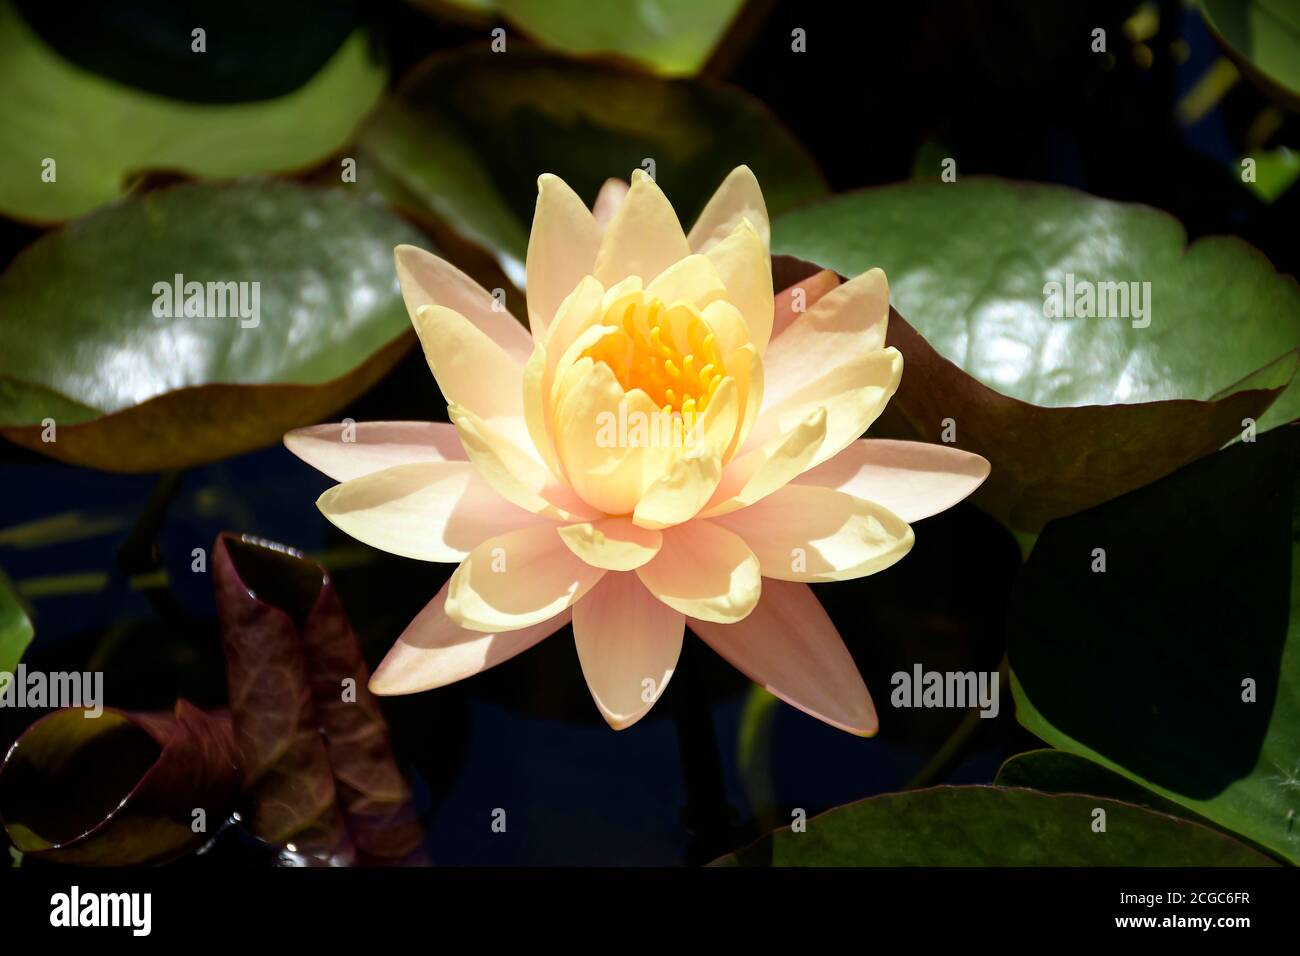 Beautiful flower of Pink and yellow color of water lily on natural habitat background. Stock Photo